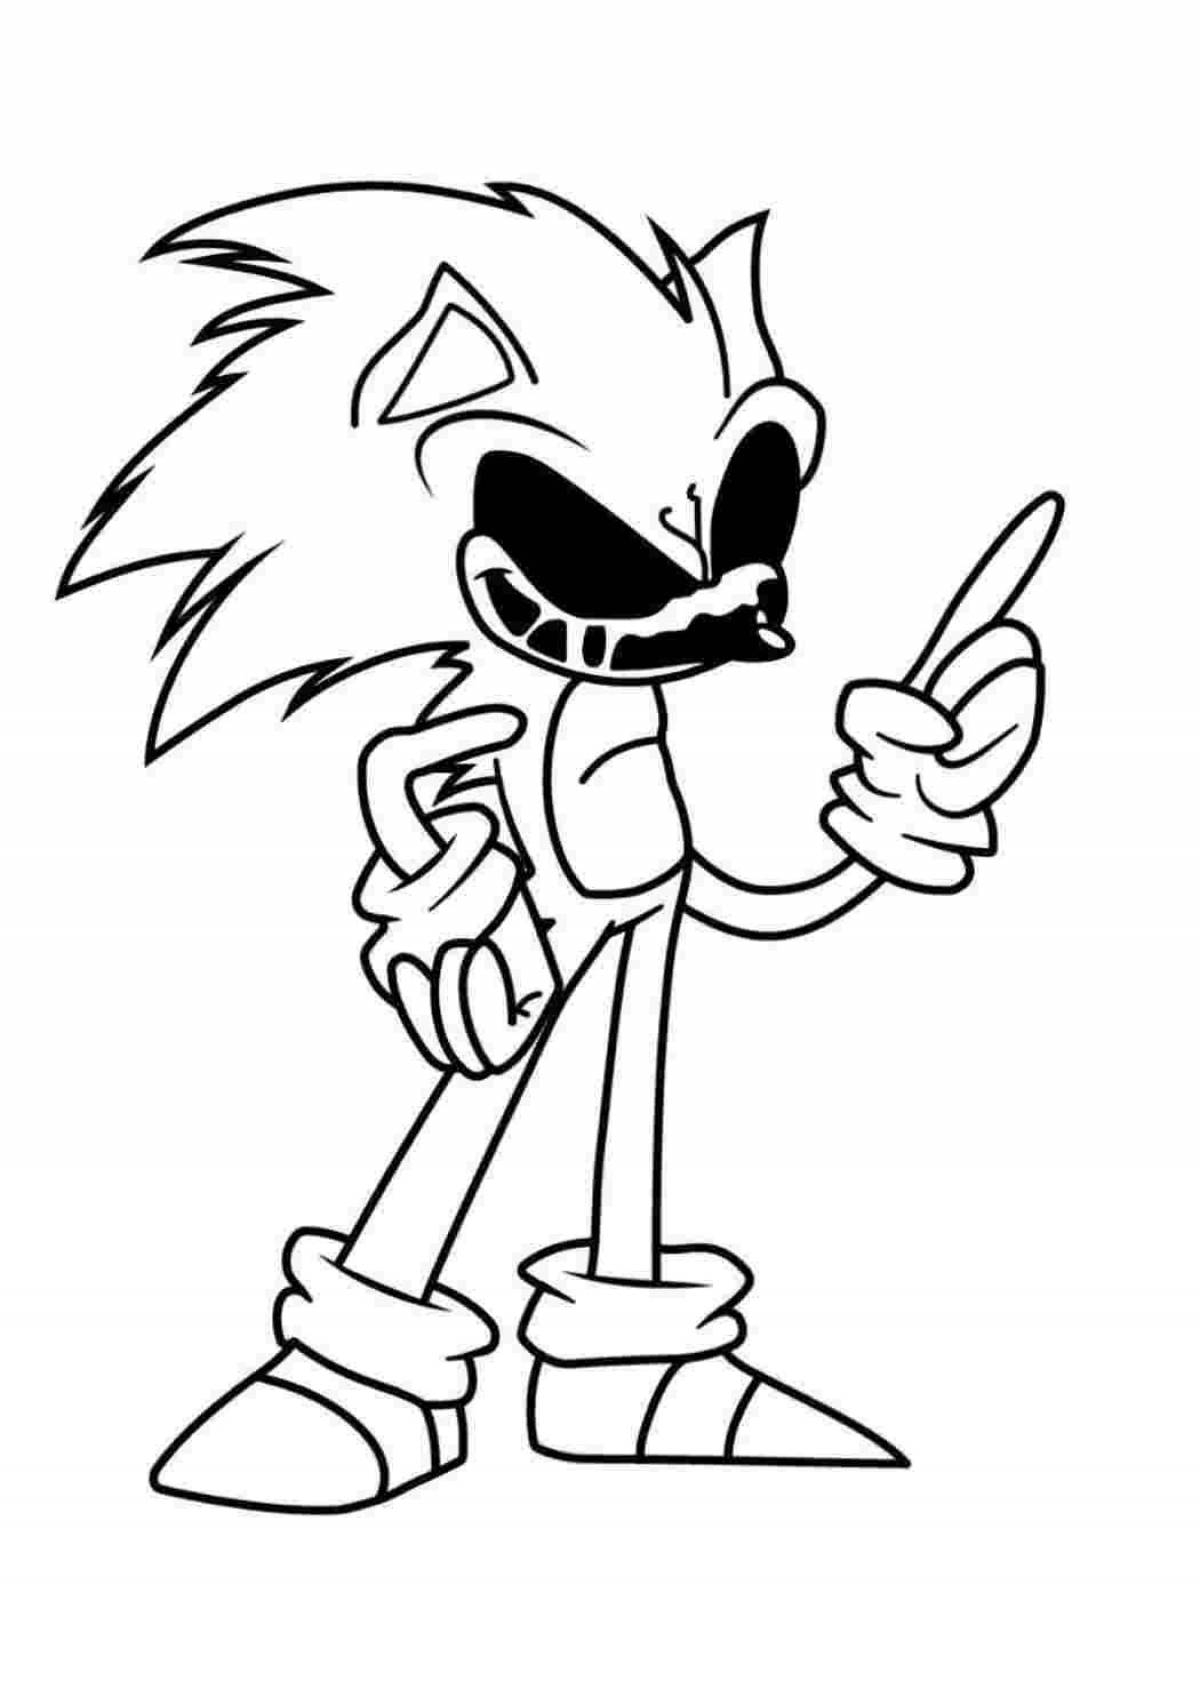 Fancy sonicexe fnf coloring